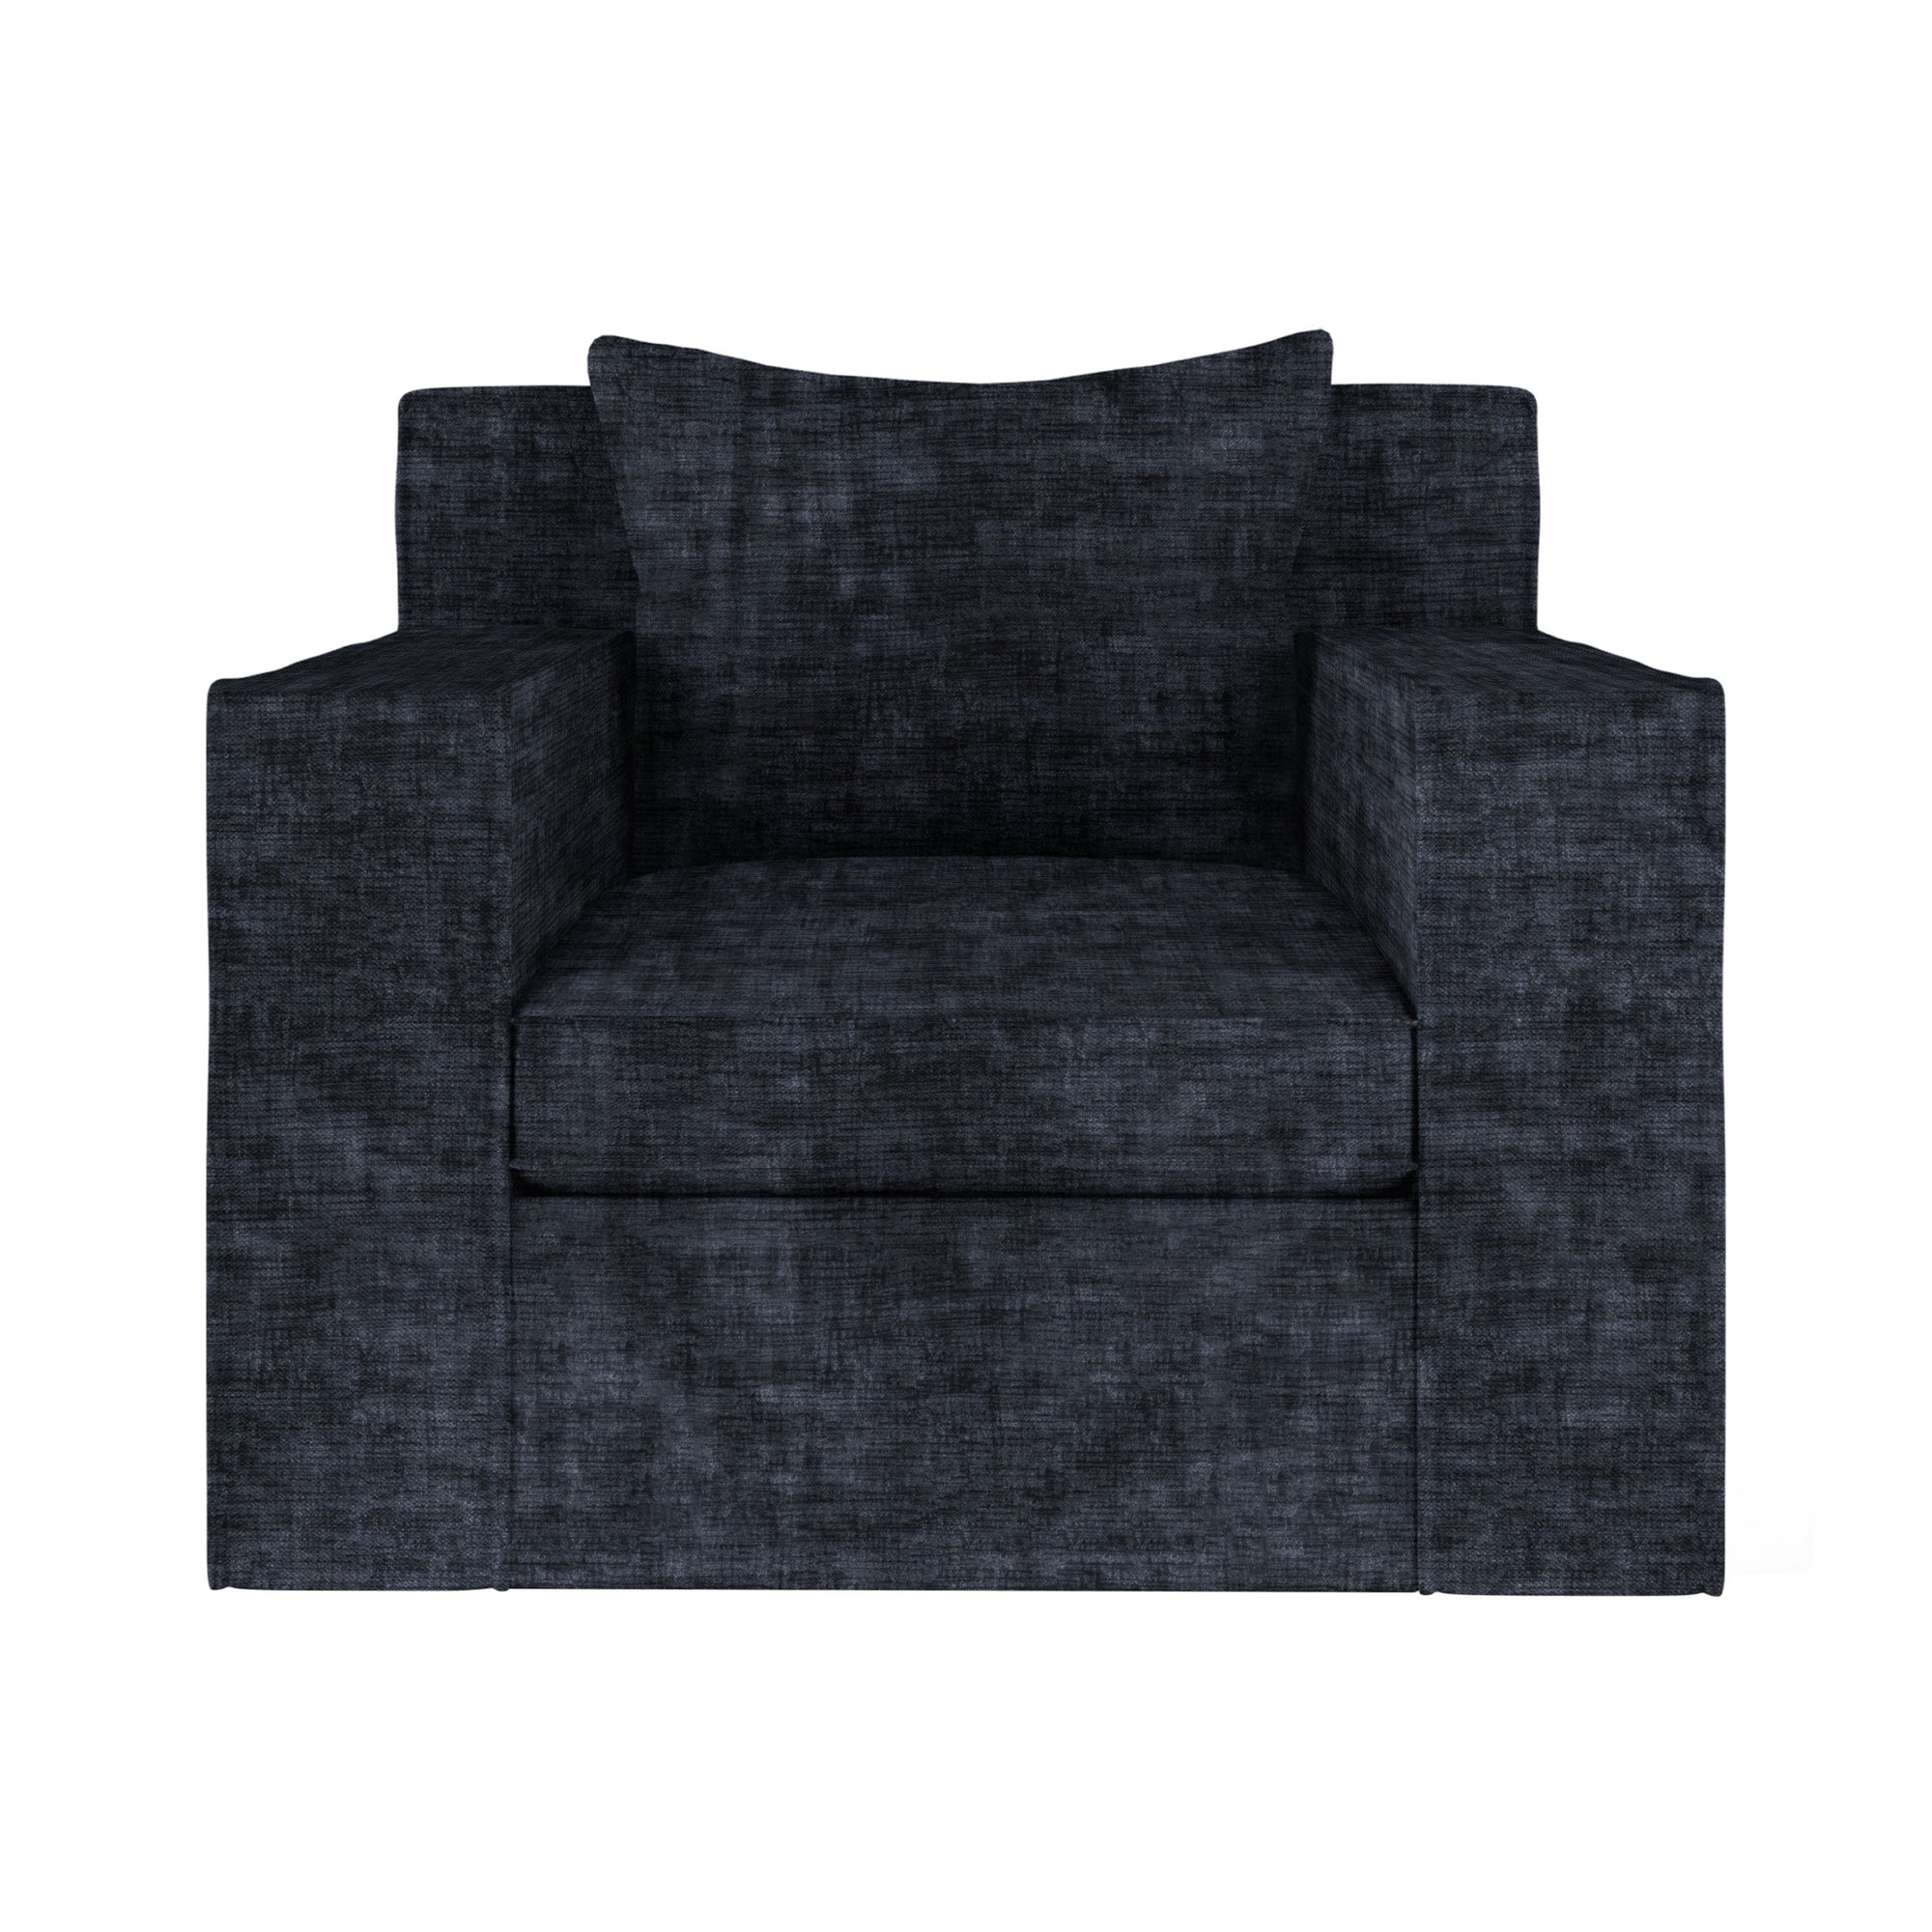 Mulberry Chair - Blue Print Crushed Velvet